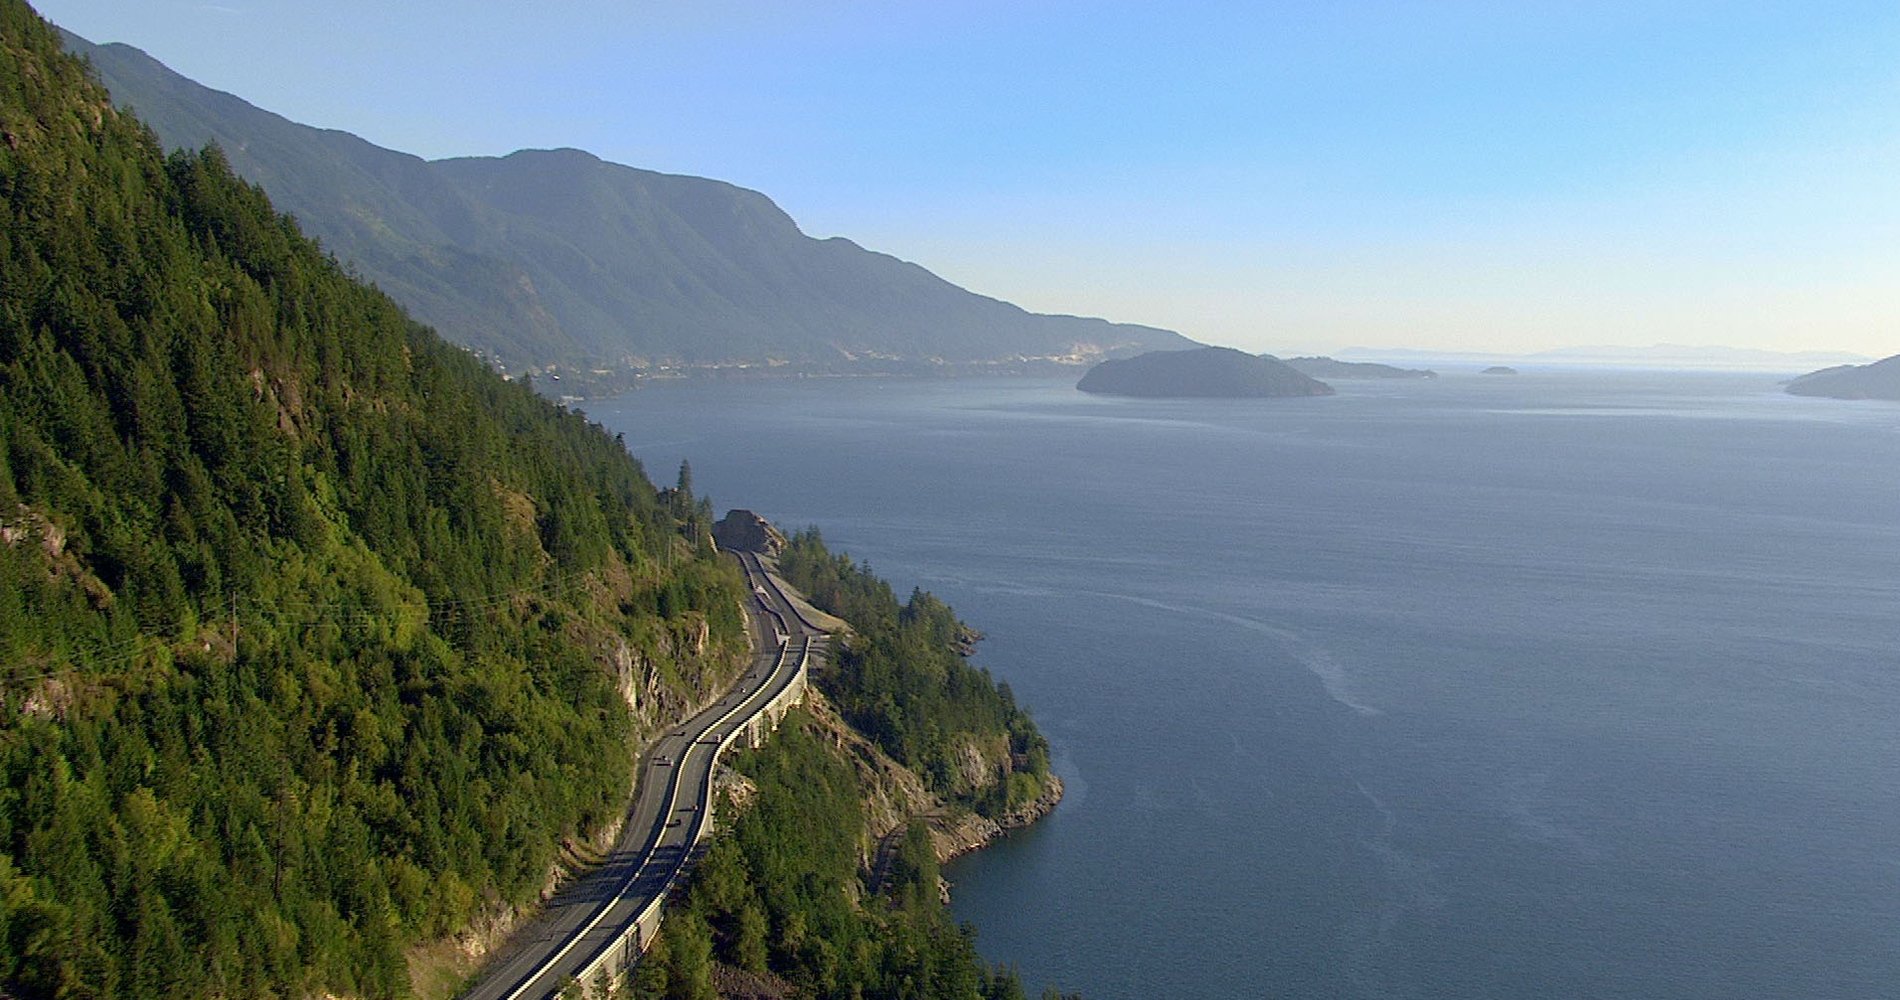 Cars driving the Sea to Sky Highway between Vancouver and Whistler with ocean and mountains in the background.